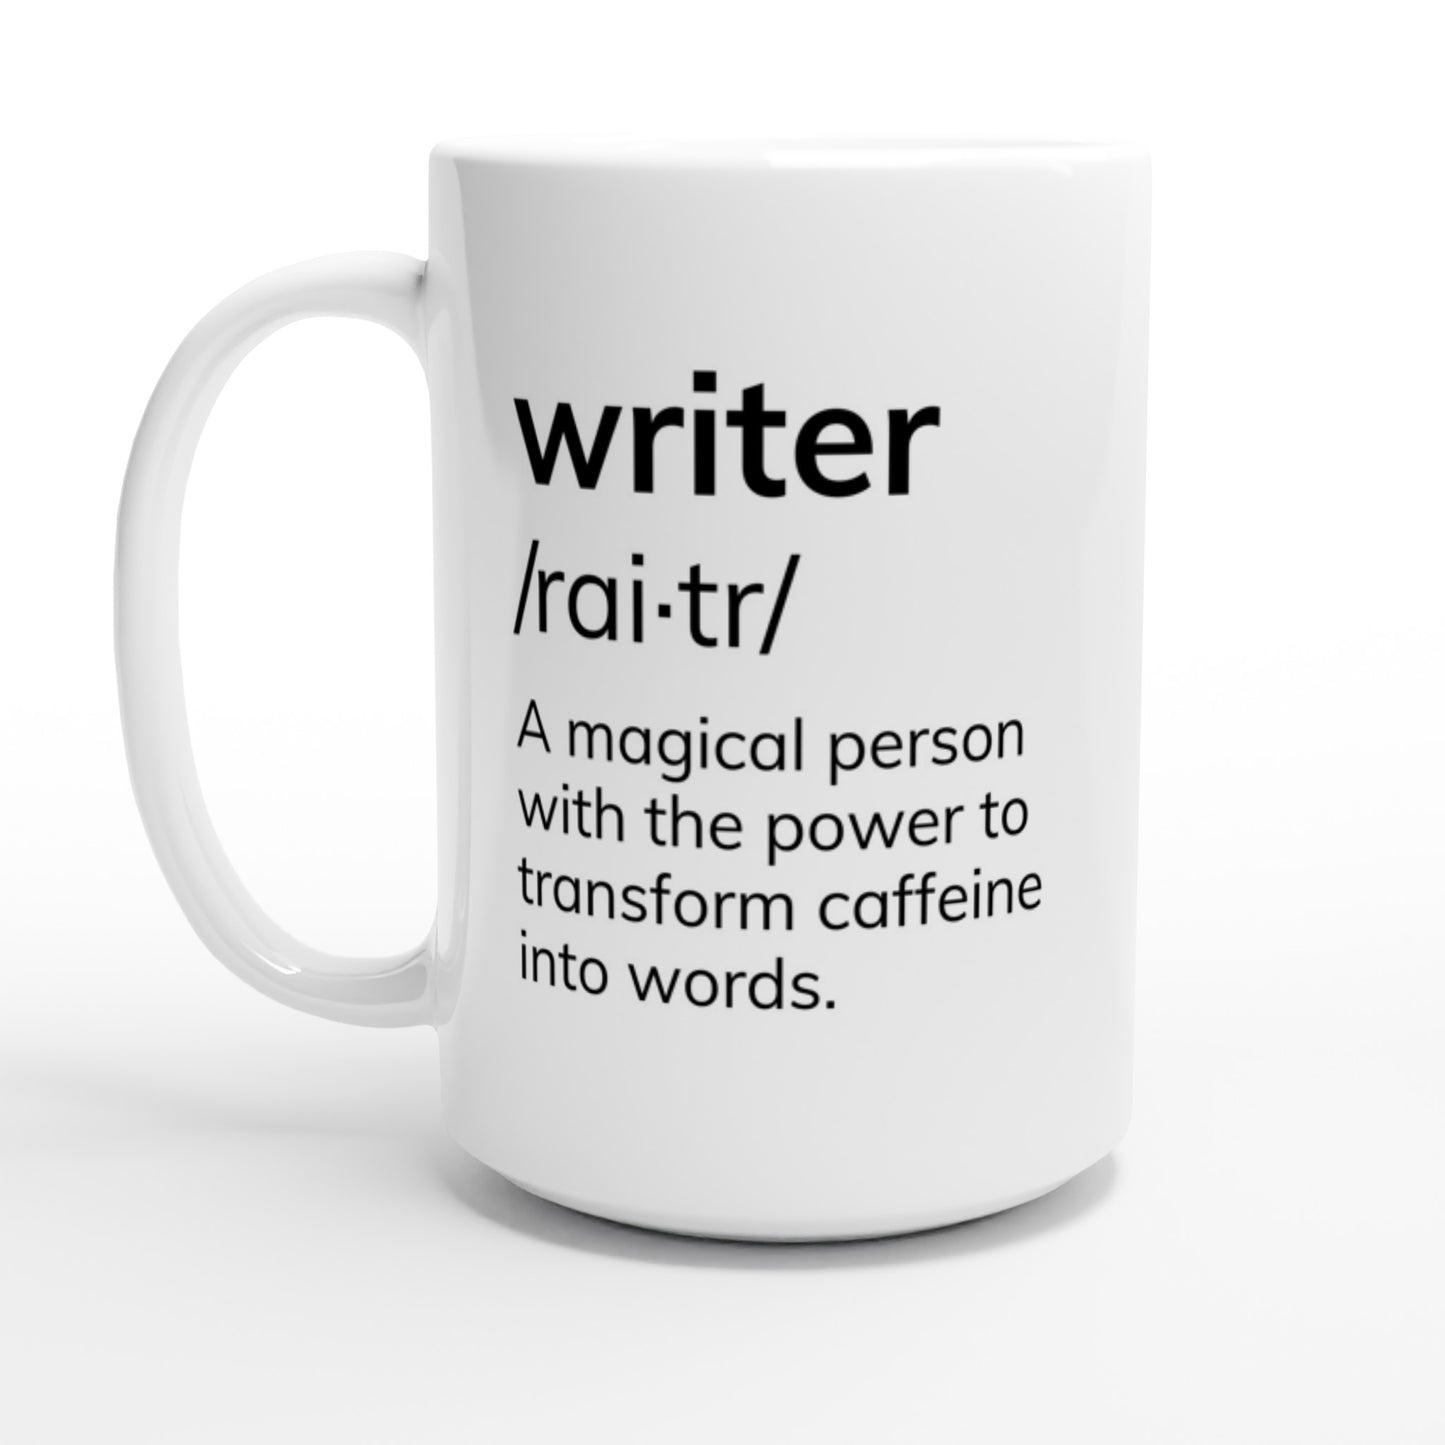 A white coffee mug with the product name, "Writer: A magical person with the power to transform caffeine into words. // Writing Themed Mug," prominently displayed.